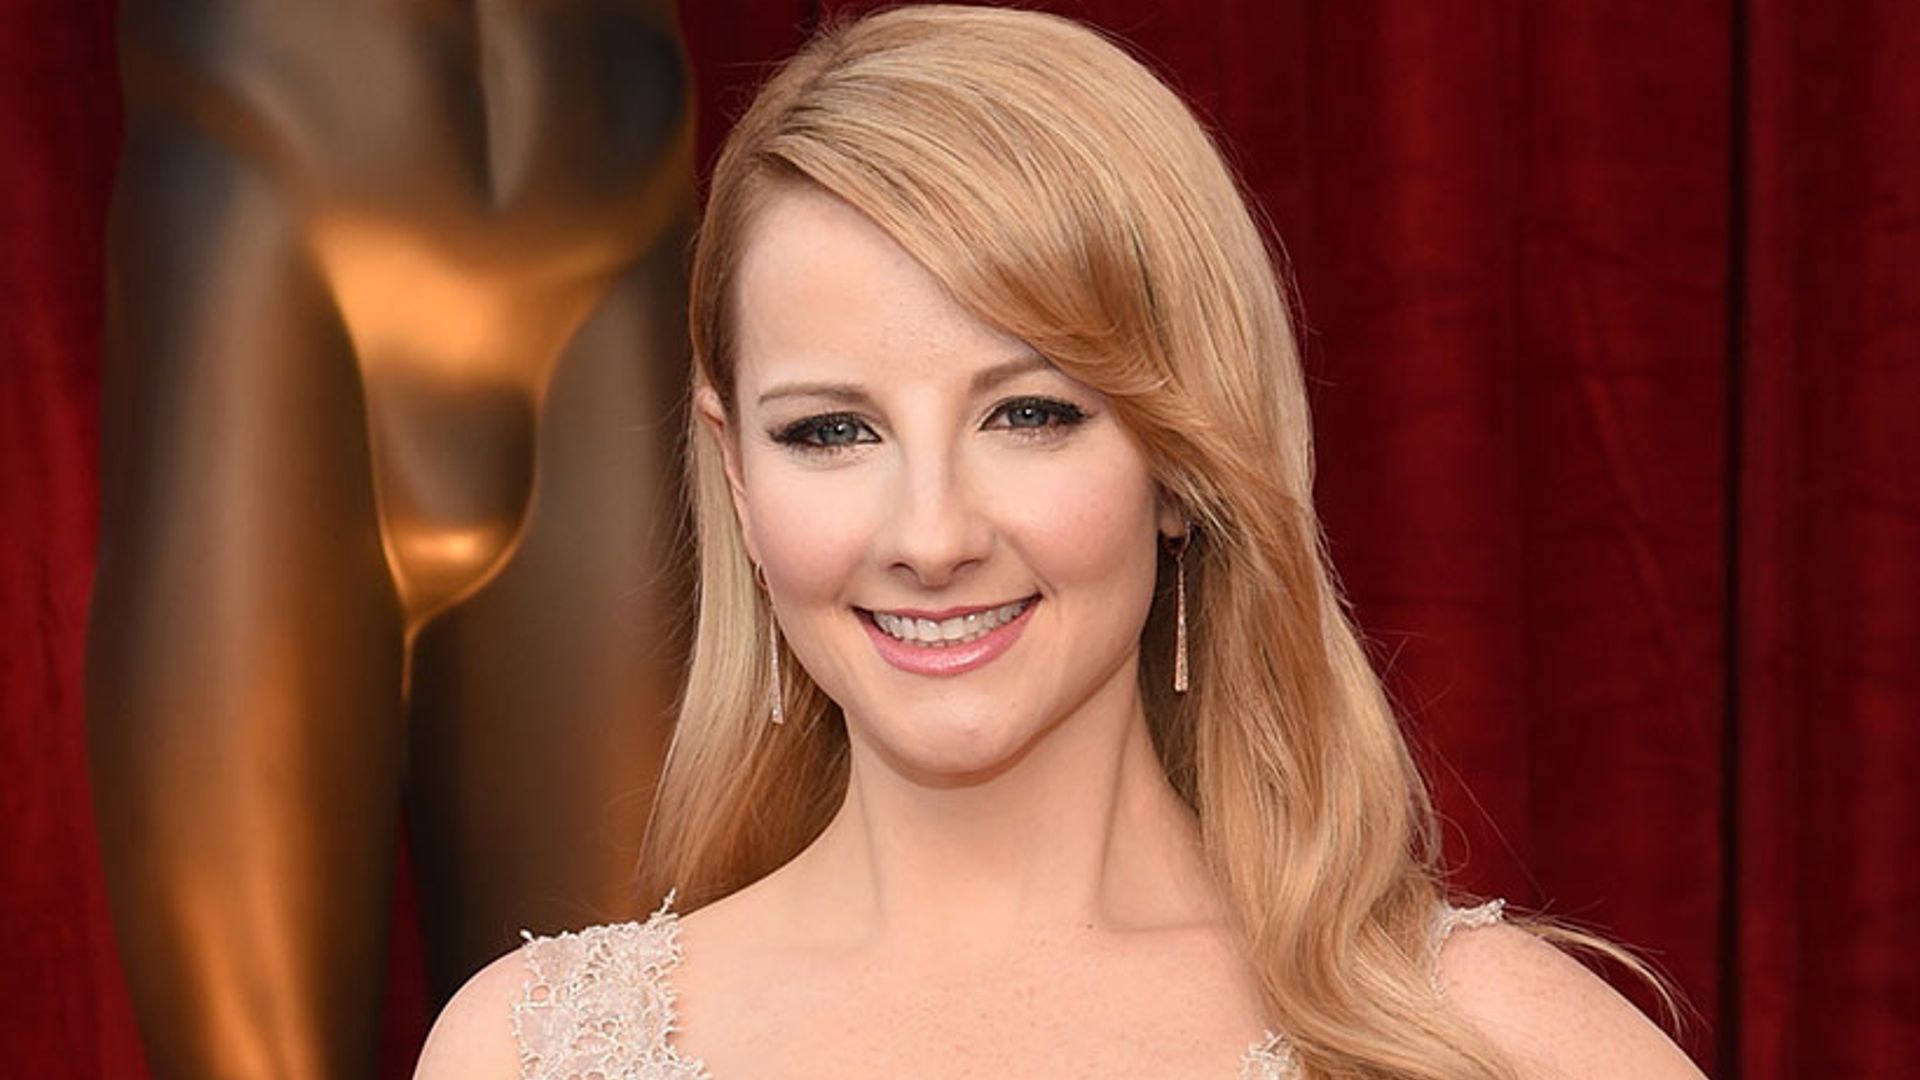 Big Bang Theory star Melissa Rauch announces pregnancy in emotional post